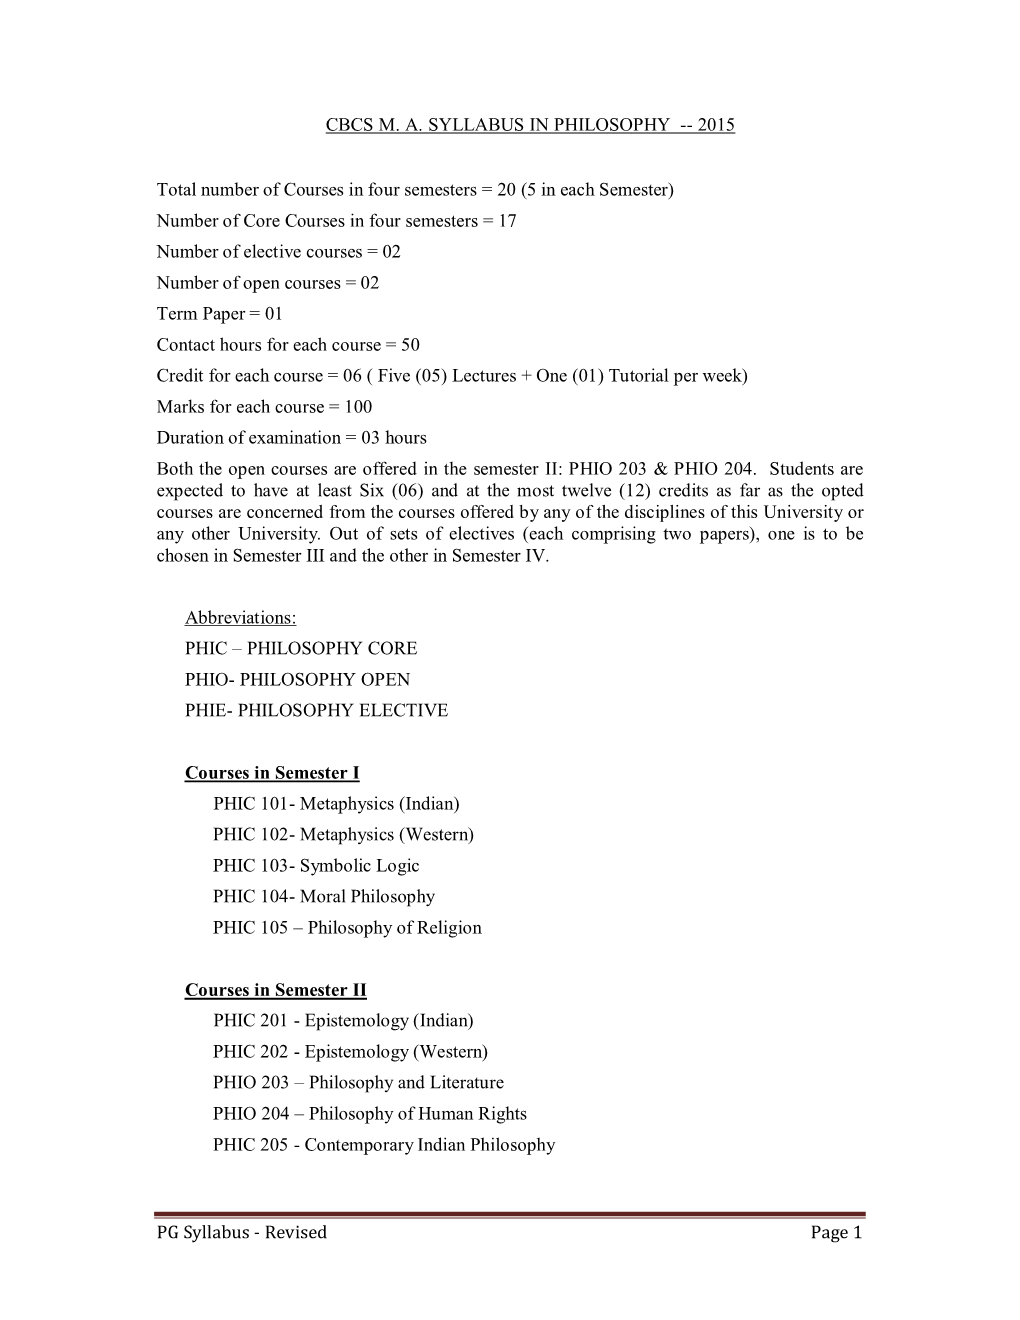 Revised Page 1 CBCS MA SYLLABUS in PHILOSOPHY